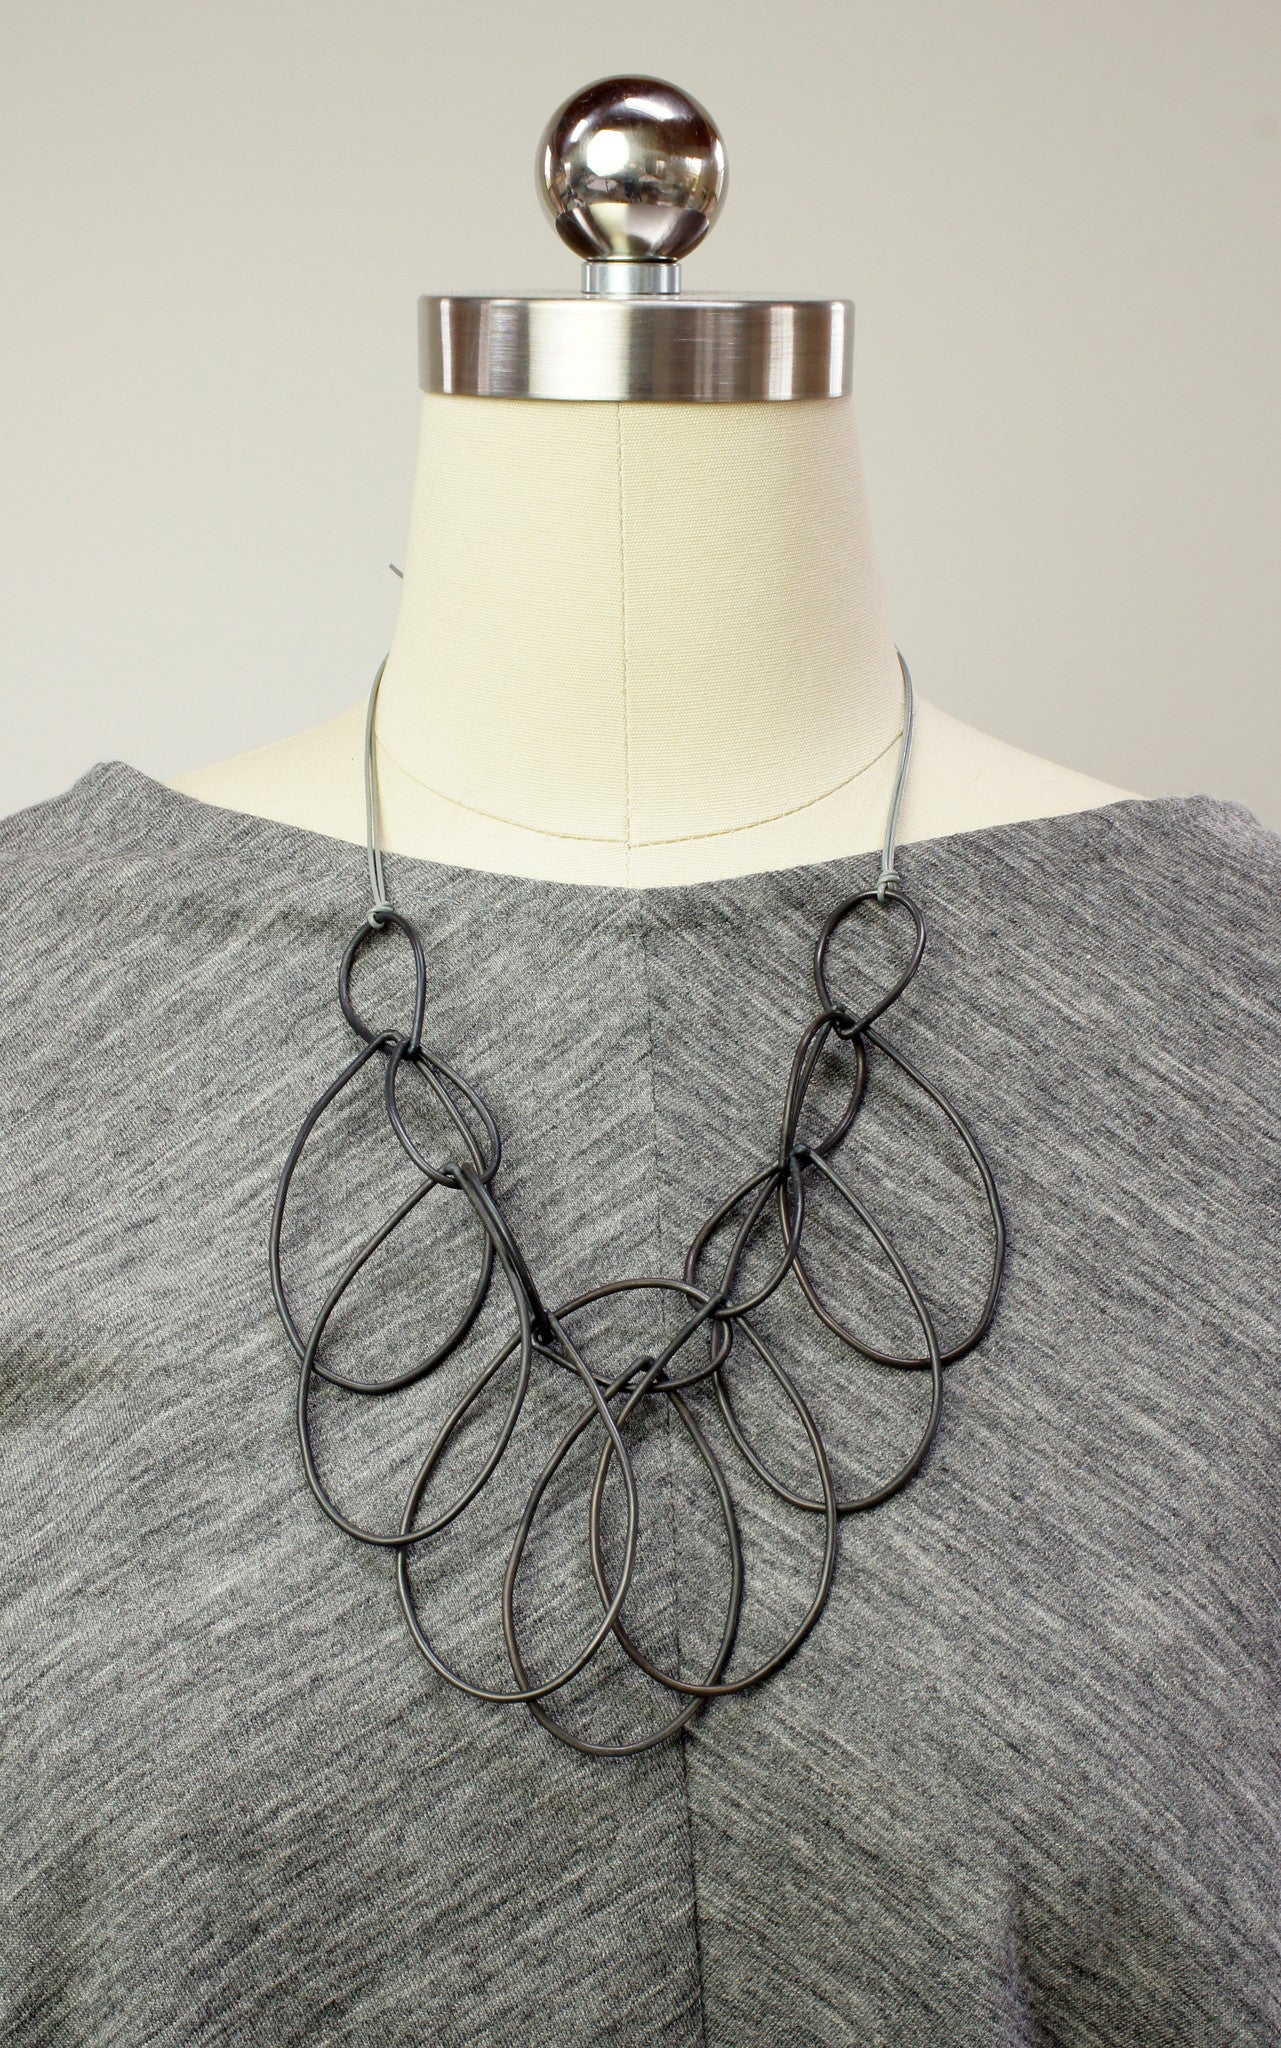 designer Megan Auman welds raw steel to create this fabulous and easy to wear statement necklace